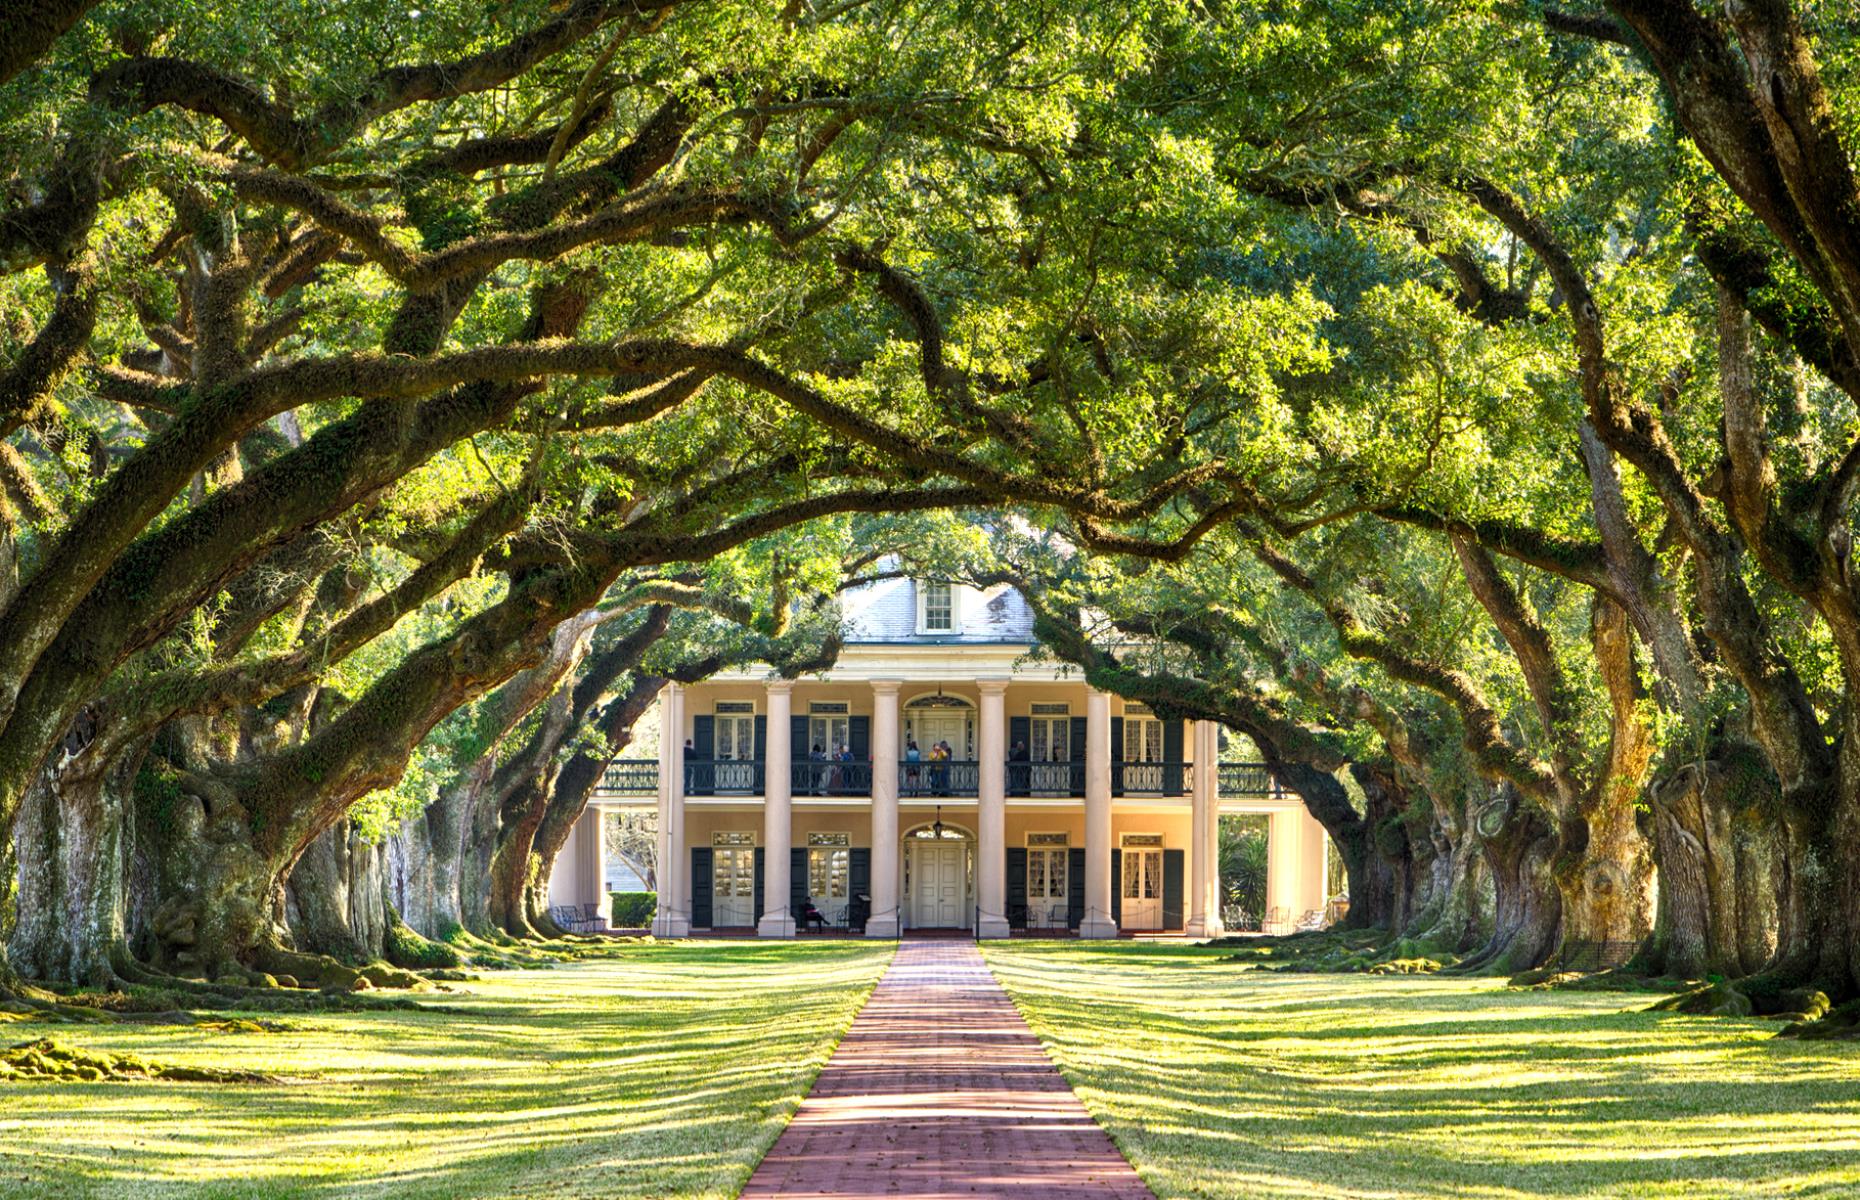 This former sugar plantation is named for the miles of graceful, arching oaks and the historic site is dedicated to educate about its 200 years plus of history. The Slavery at Oak Alley exhibit chronicles the lives of the many people enslaved here, while the Civil War Tent brings this bloody conflict to life.